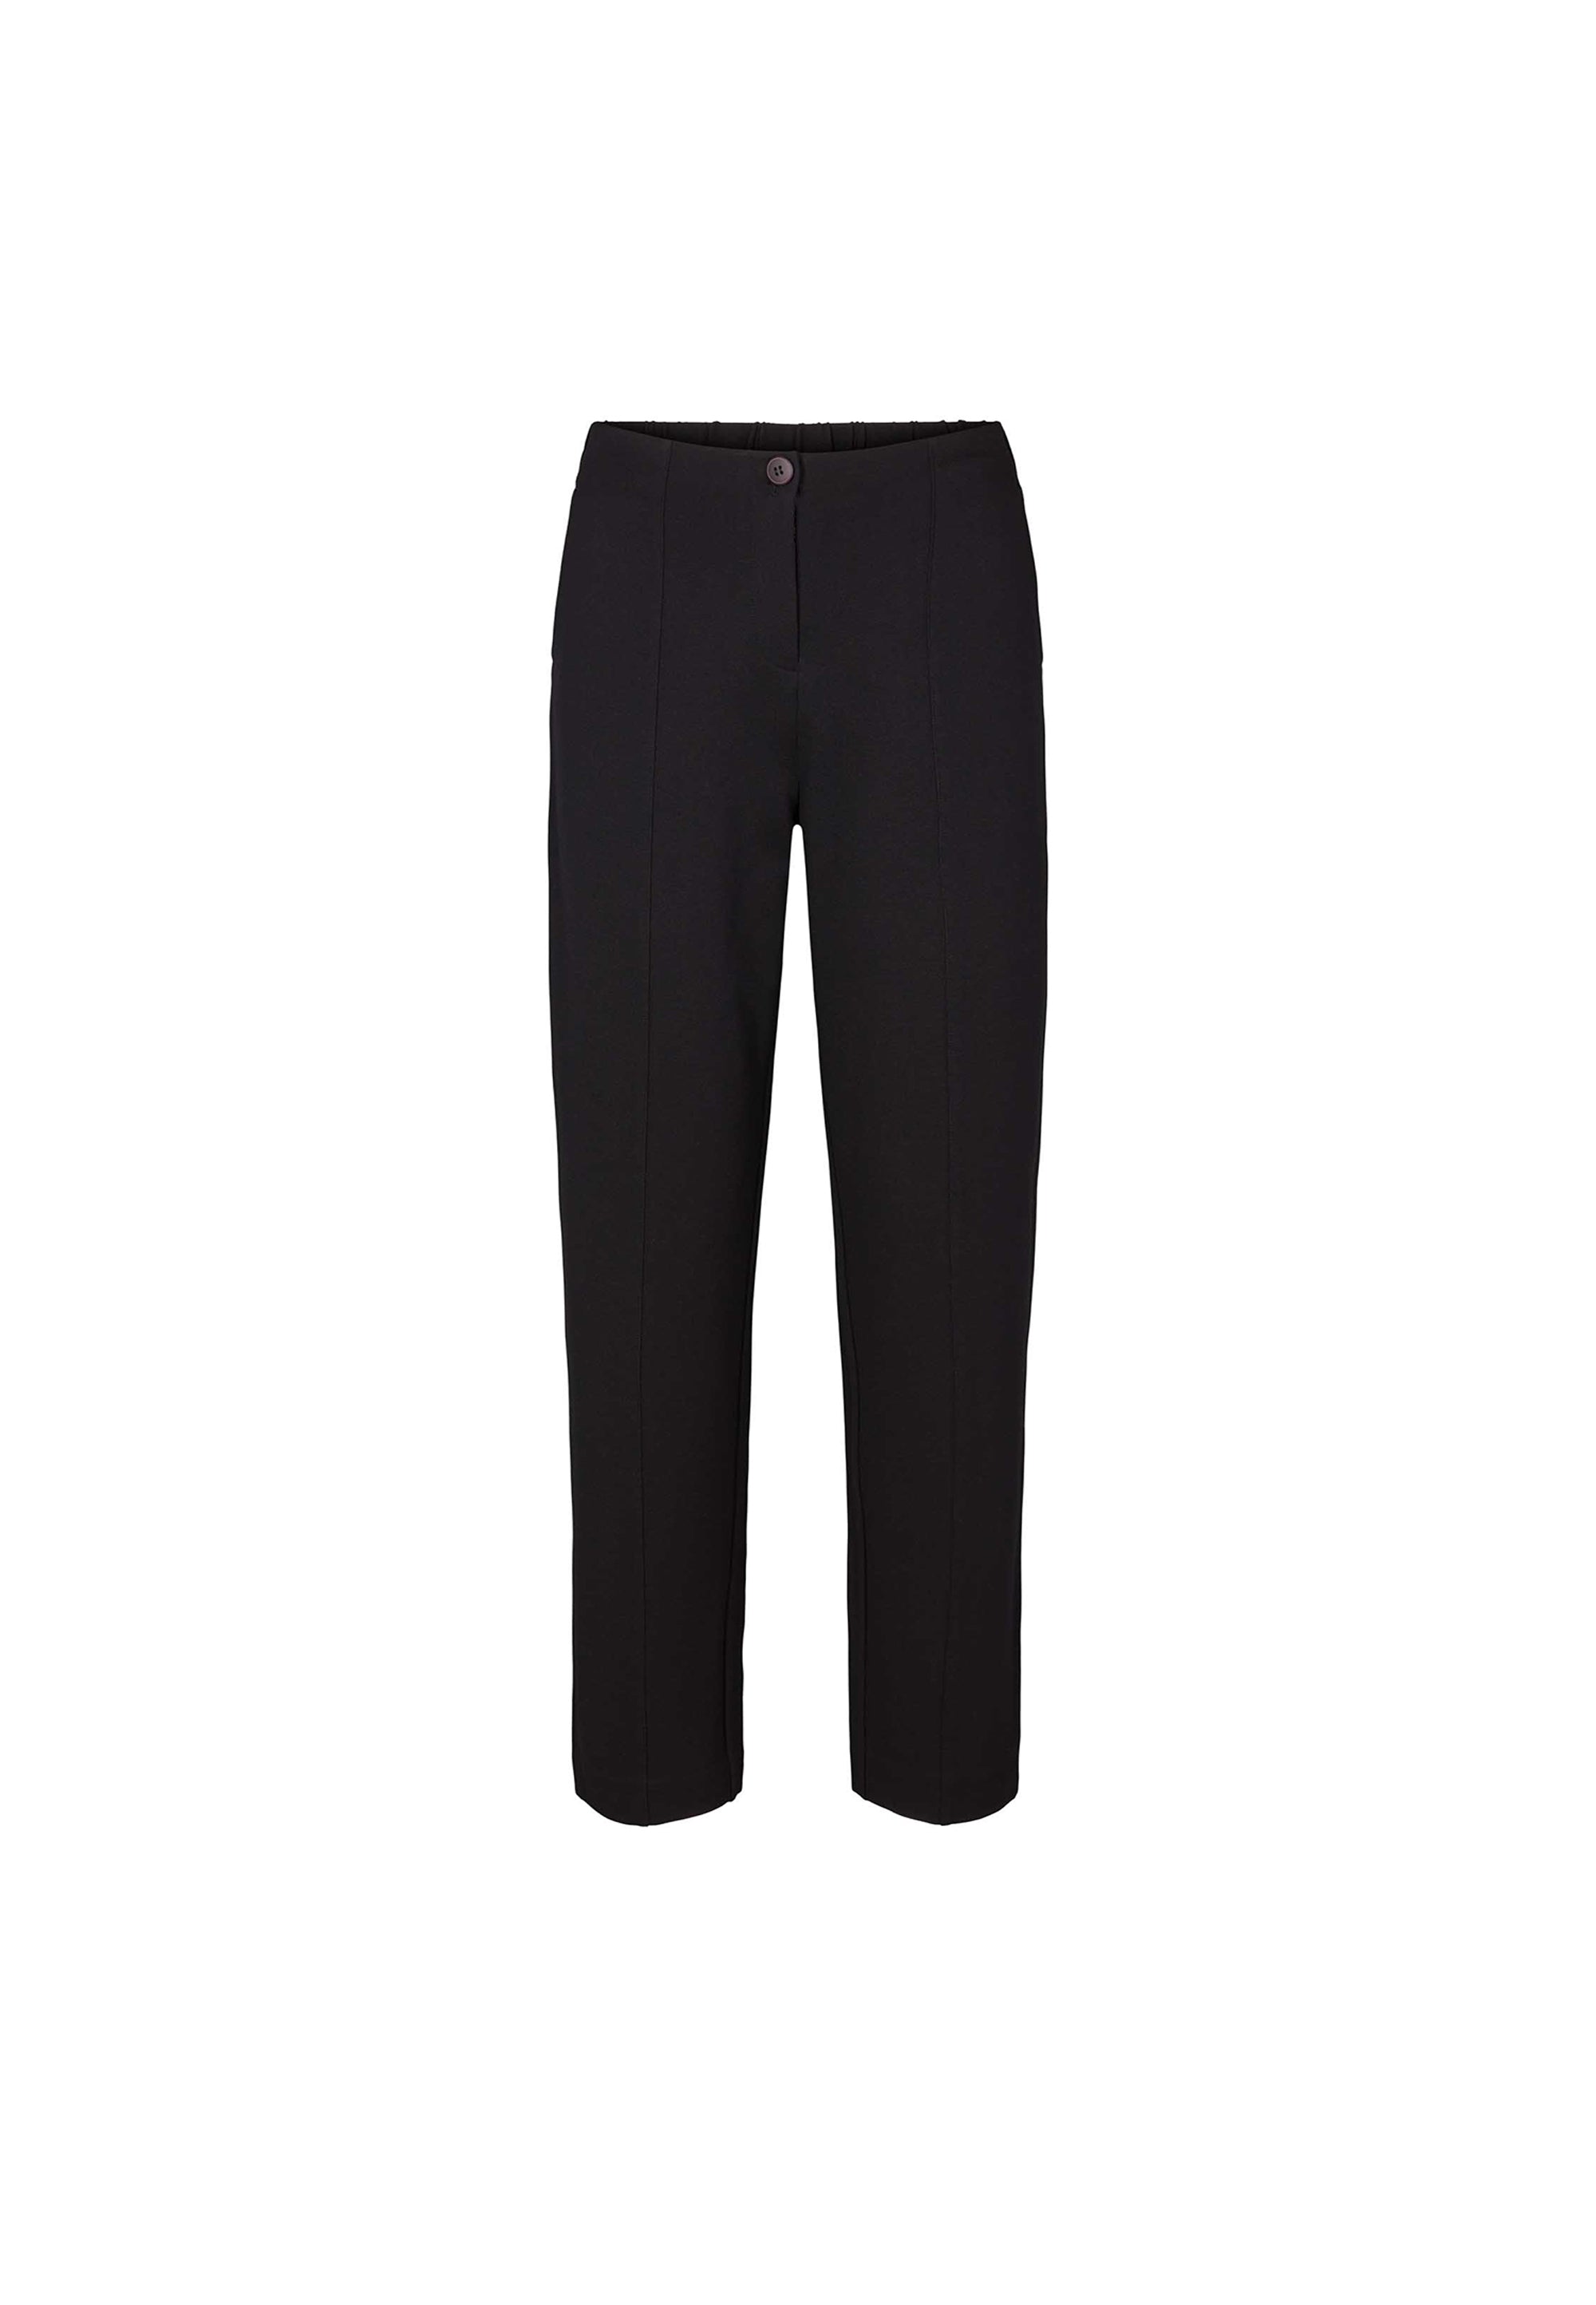 LAURIE Diana Relaxed - Medium Length Trousers RELAXED Schwarz